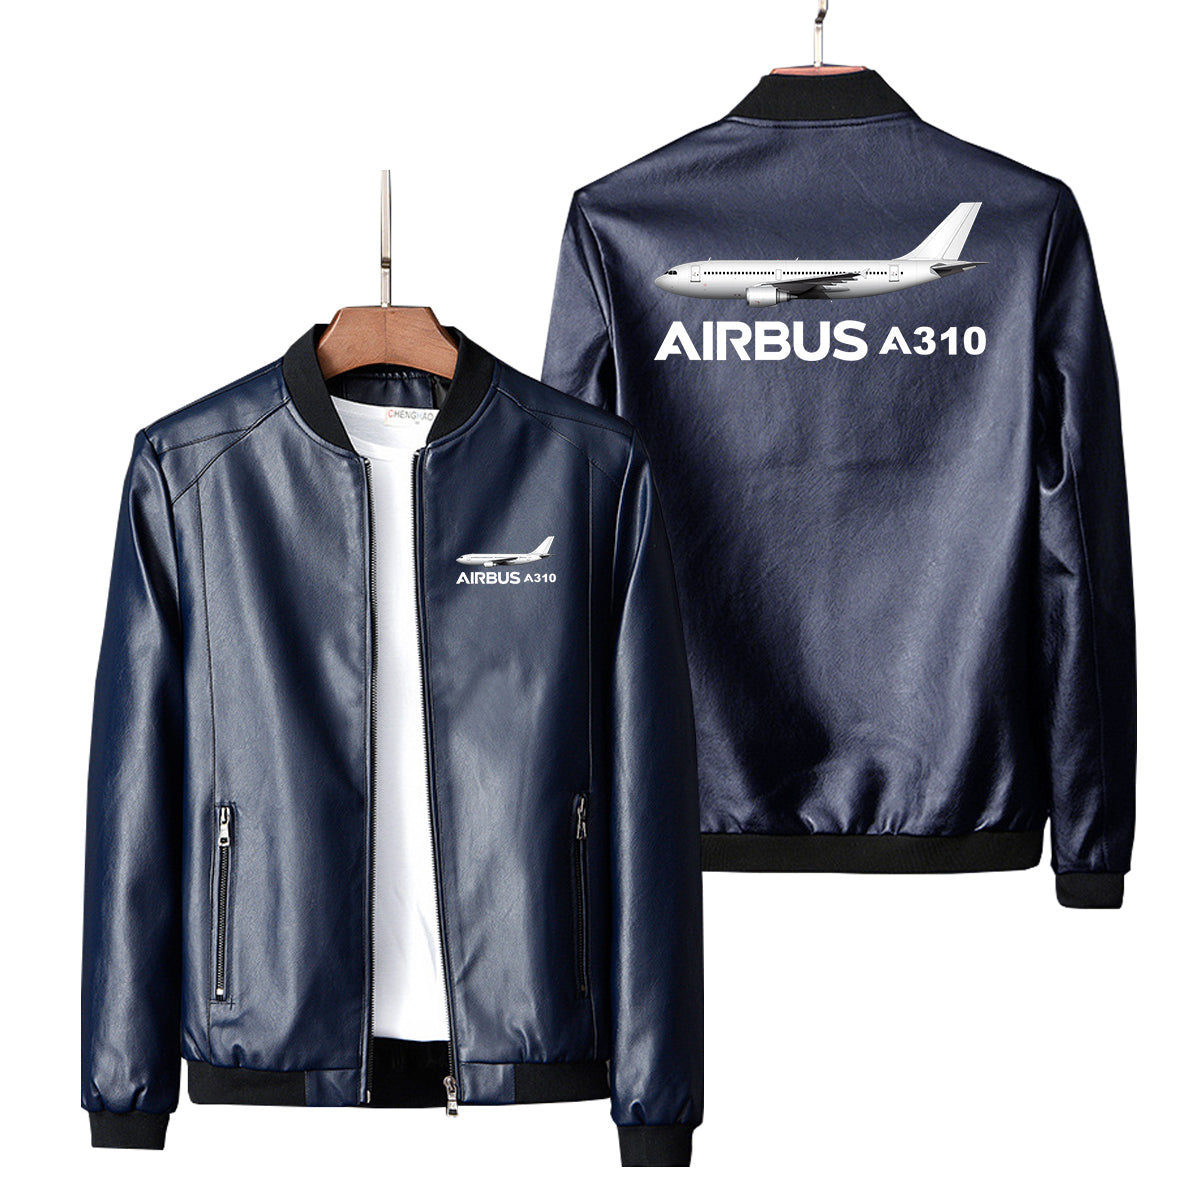 The Airbus A310 Designed PU Leather Jackets